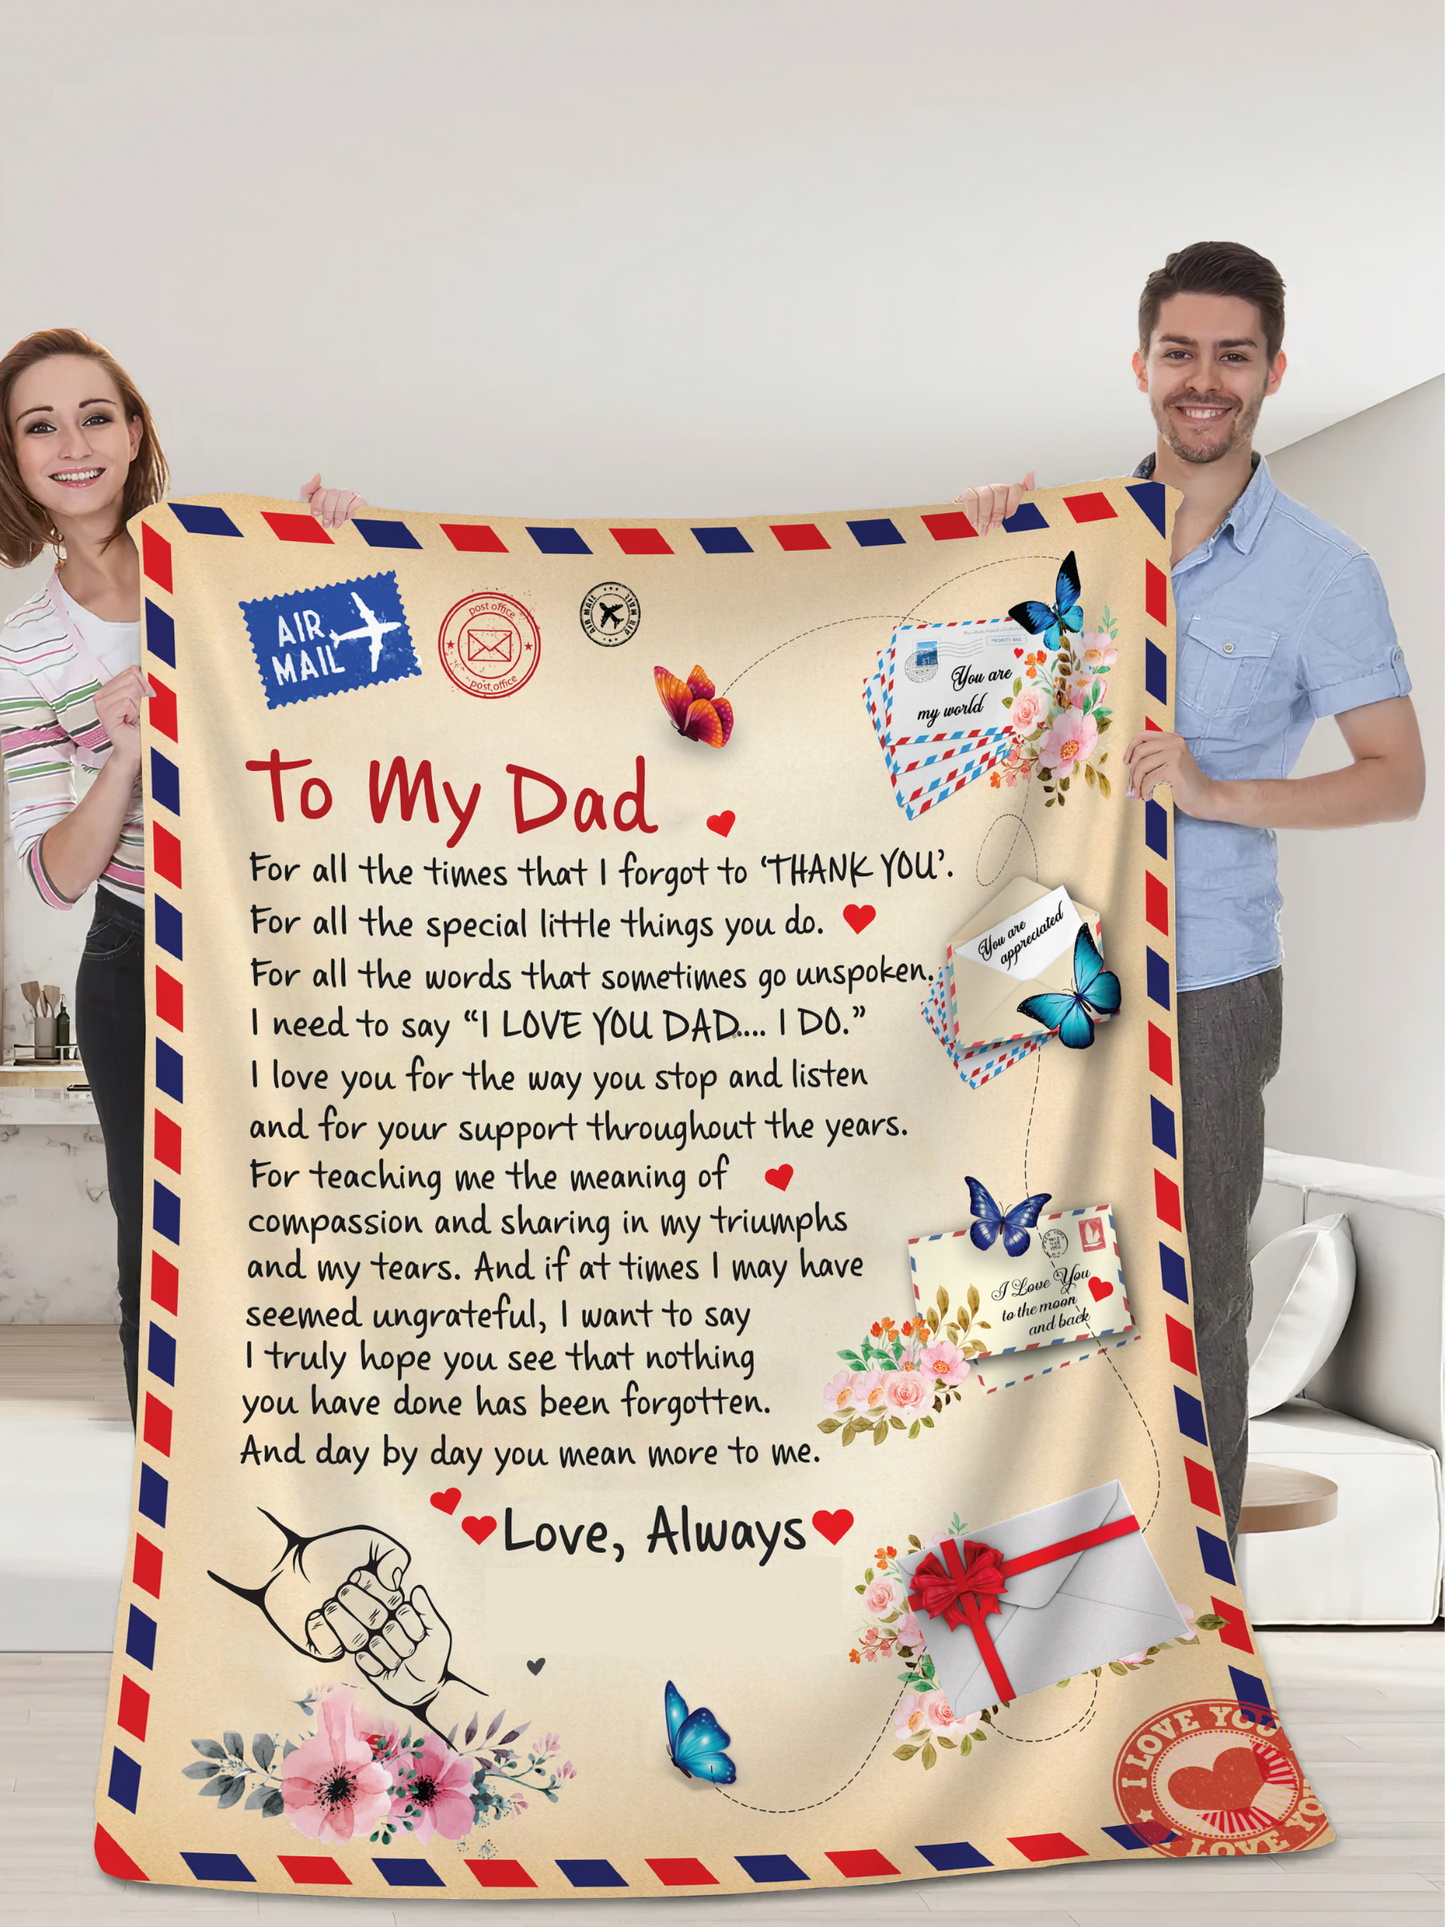 Dad - Giant Post Card Blanket - From Son